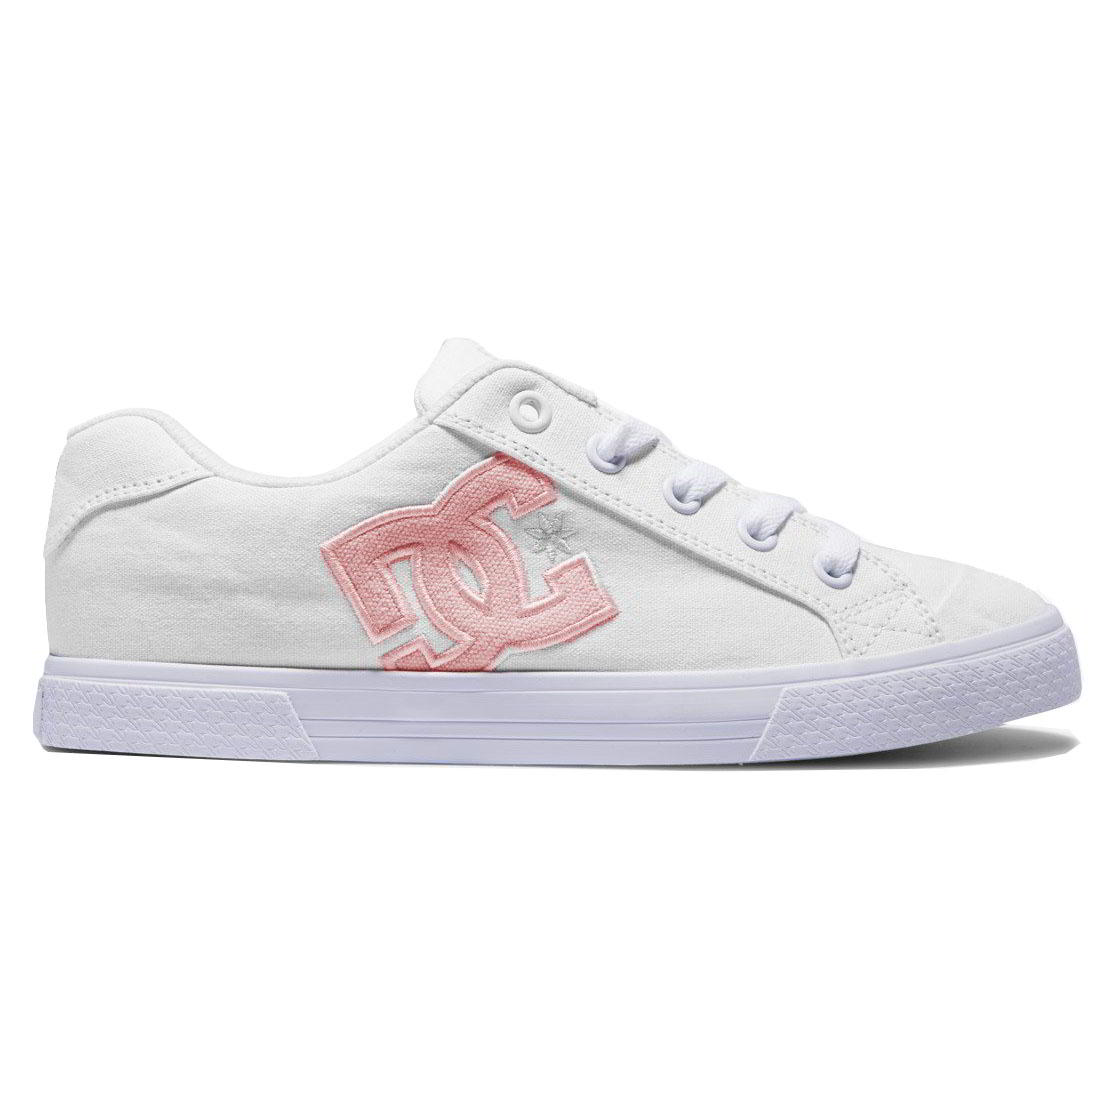 DC Womens Chelsea Skate Shoes Trainers White Pink - UK 6 2951